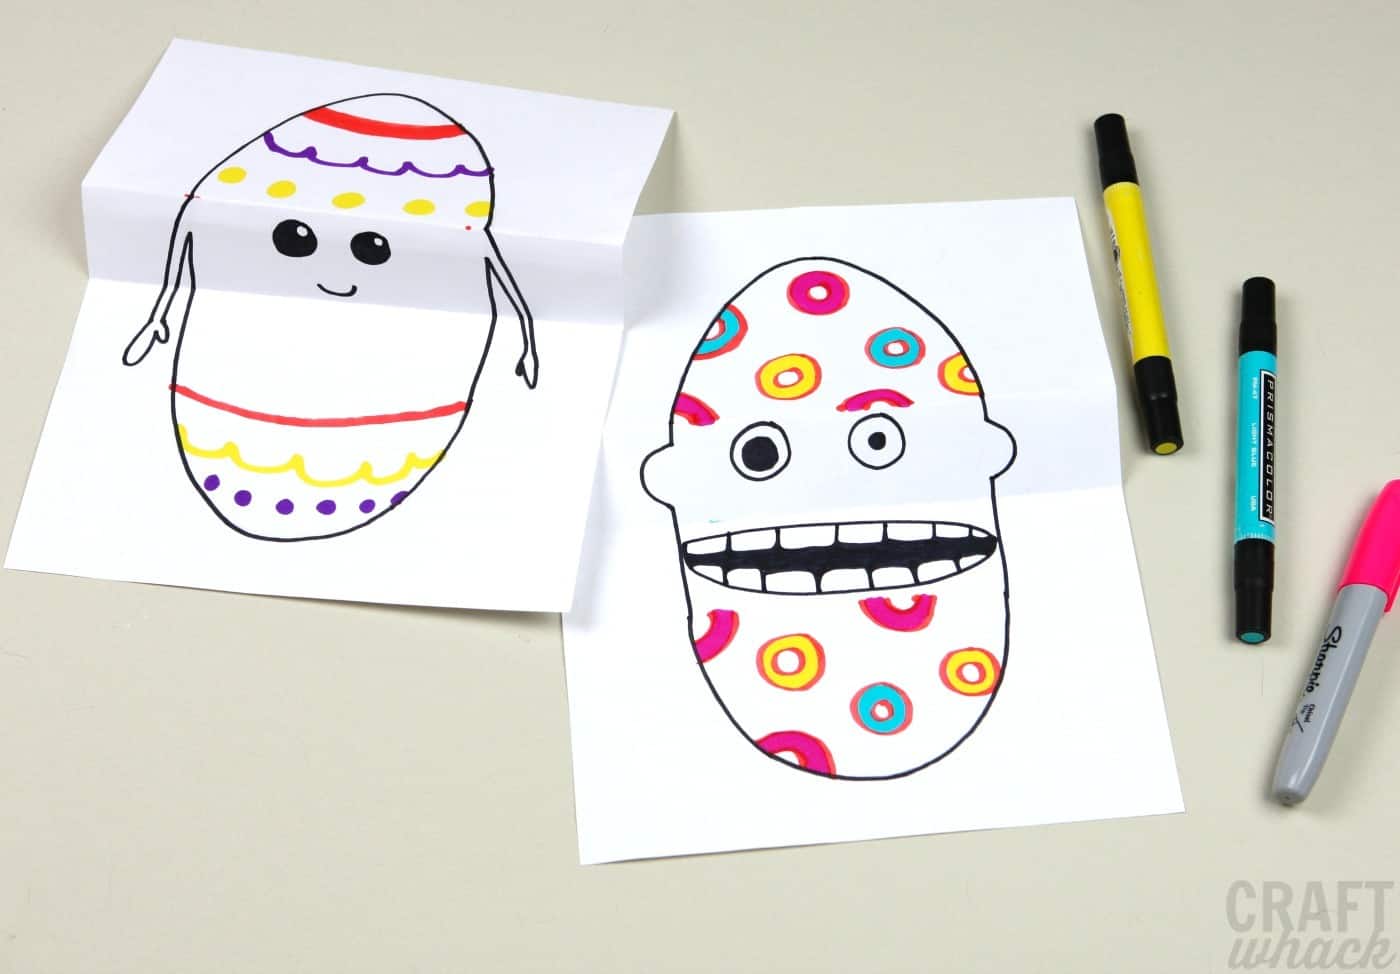 Funny Easter egg drawings